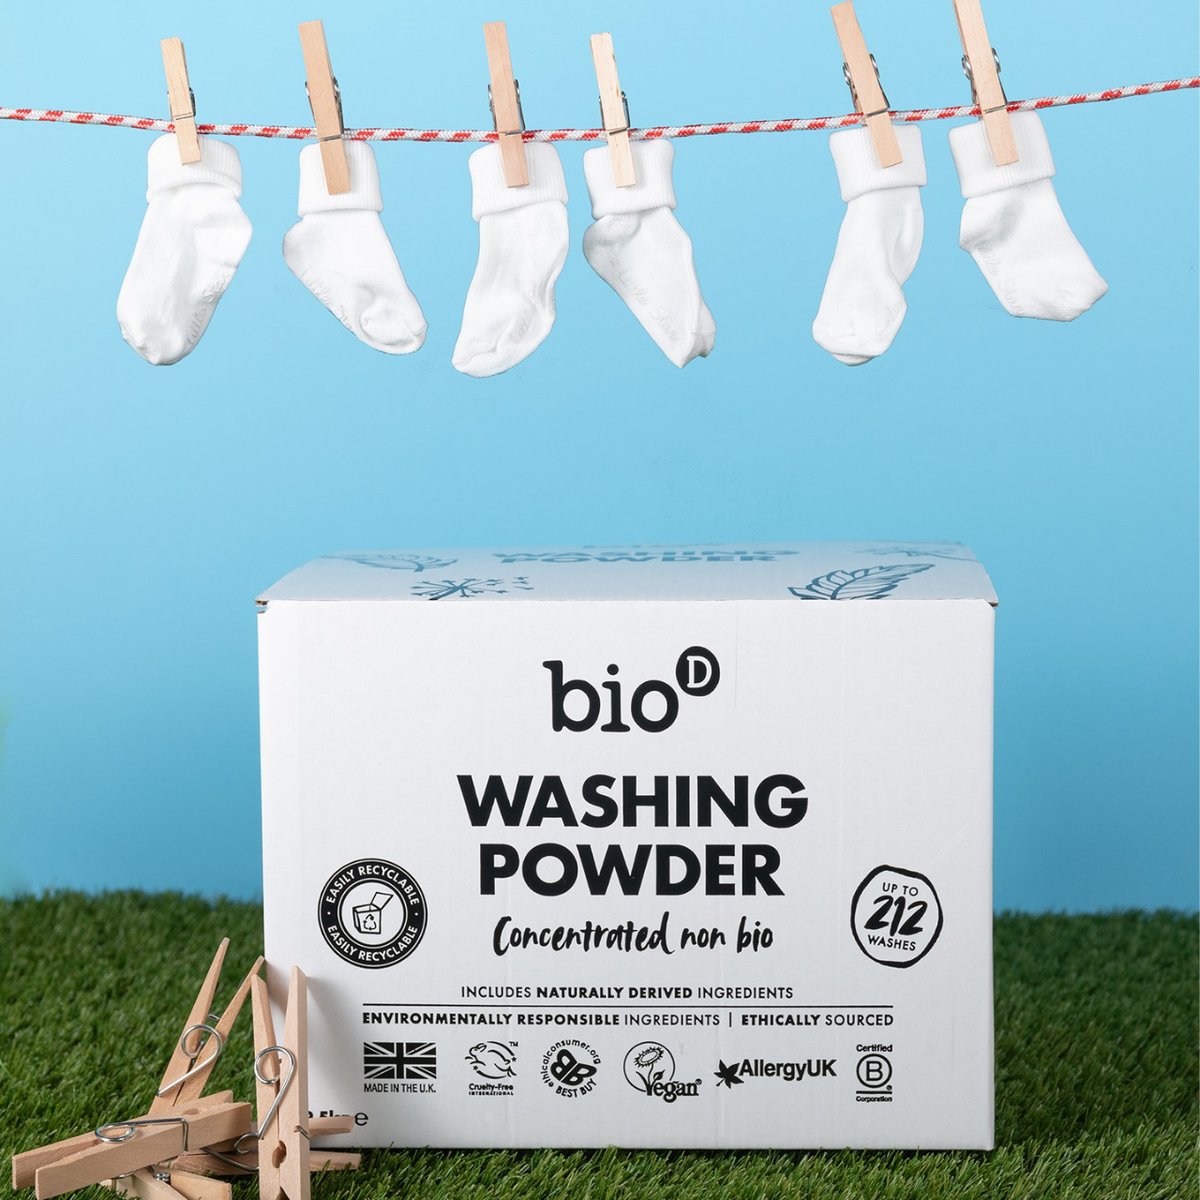 Caring for nature is important for sustainability @thebiodcompany are completely cruelty free and they have been endorsed by Nature Watch Foundation in the Compassionate Shopping Guide @crueltyfreeCSG 

#wearebluepatch #ethicalbusiness #crueltyfree #ecocleaning #sustainableliving